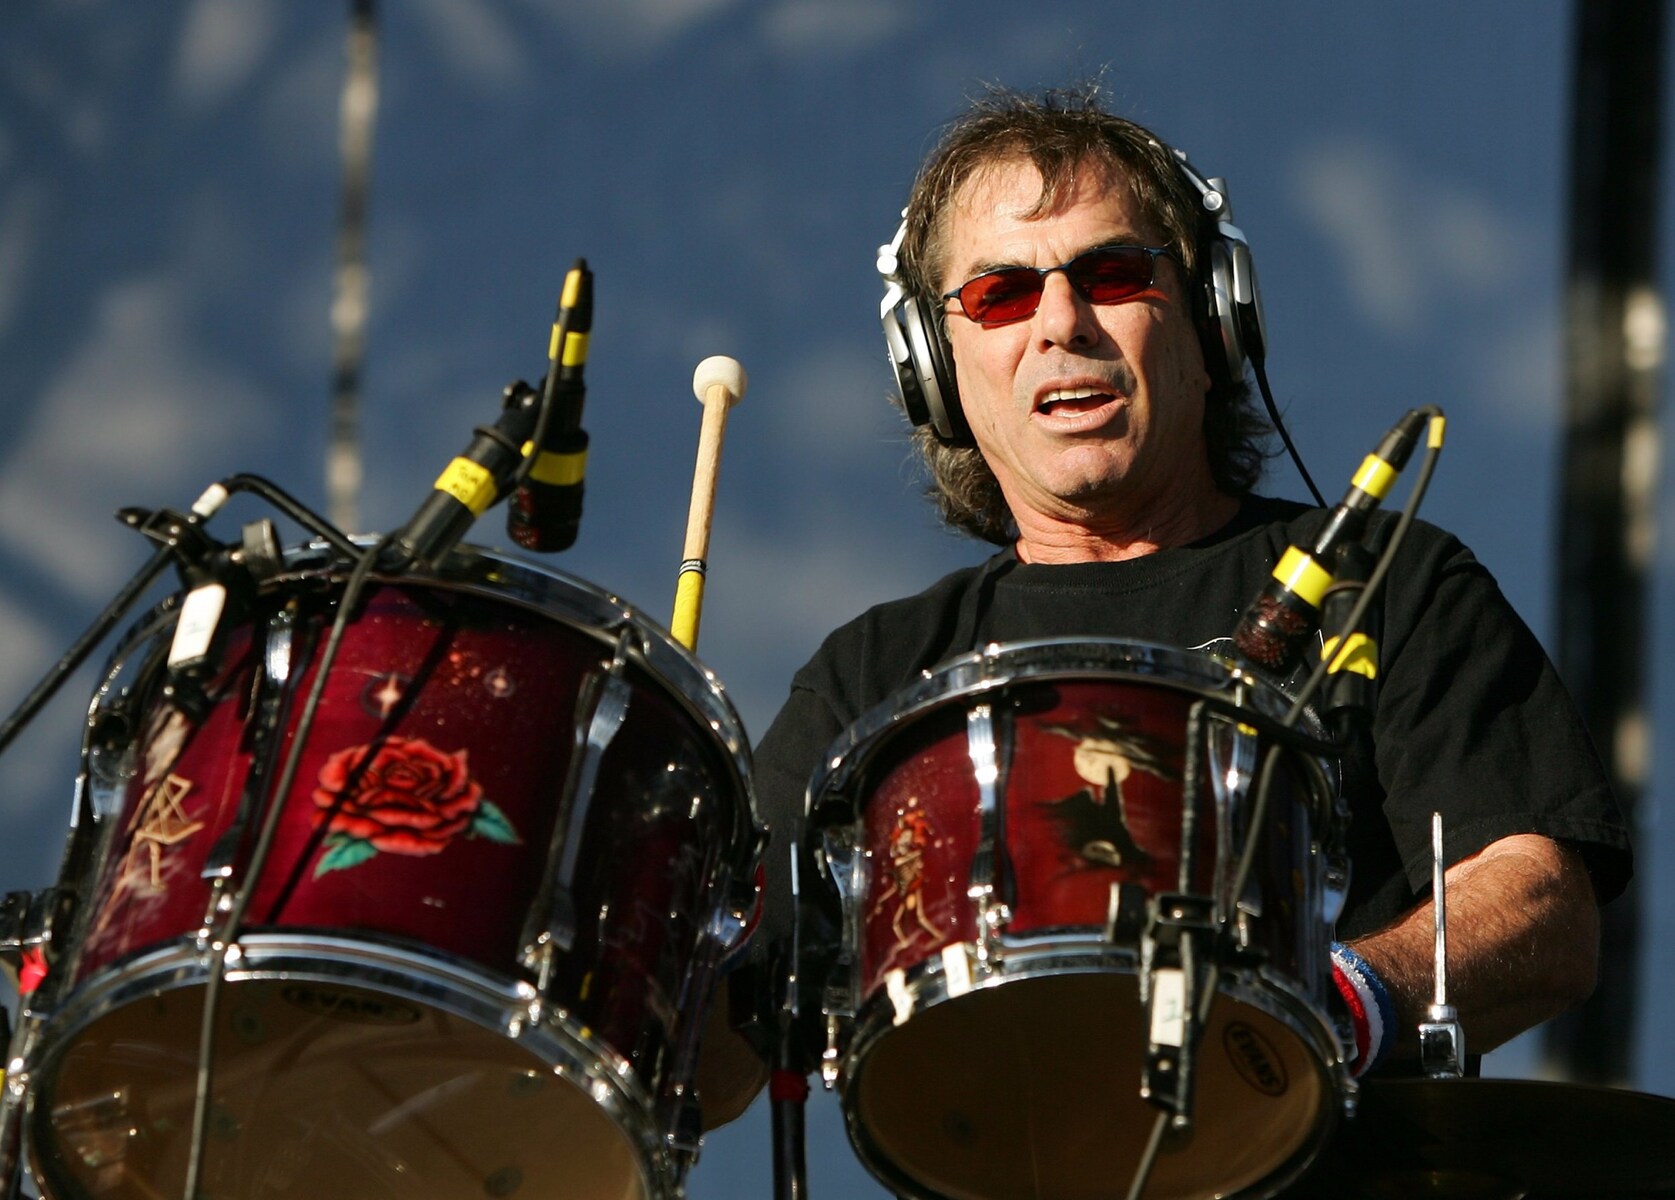 22-mind-blowing-facts-about-mickey-hart